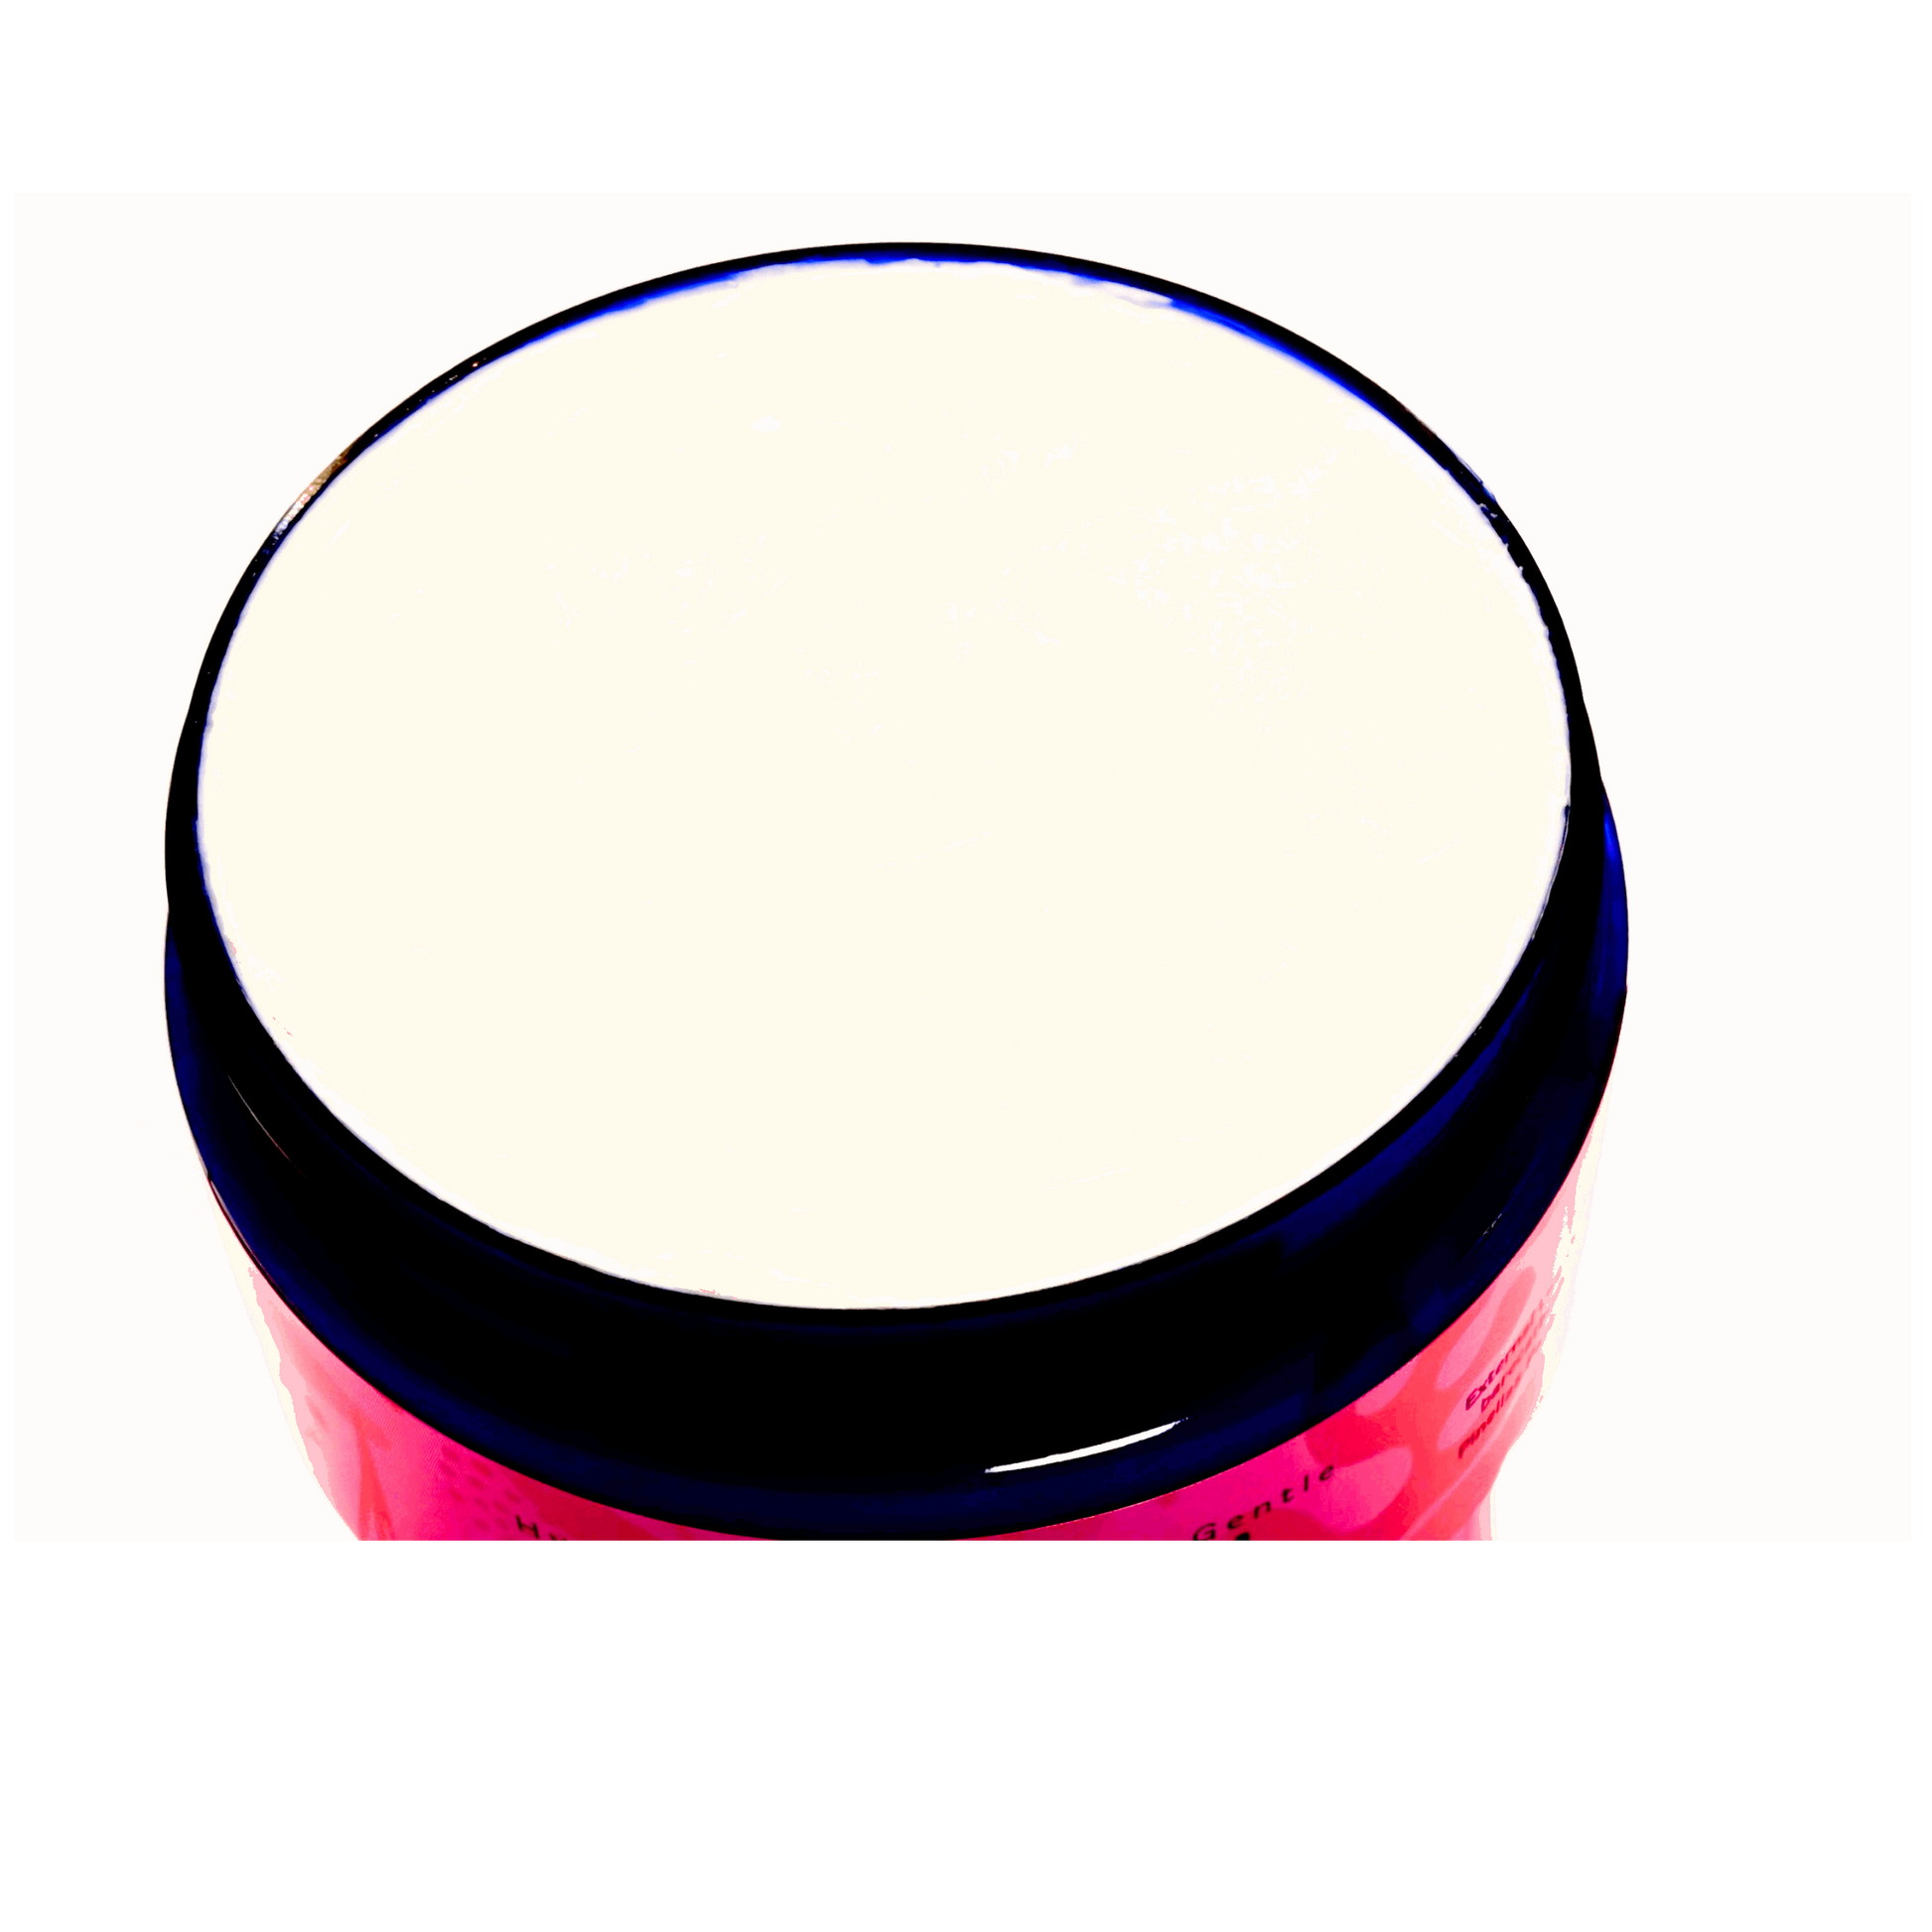 Jar of Relax, Restore, Renew Body Butter, showing its rich and creamy texture.